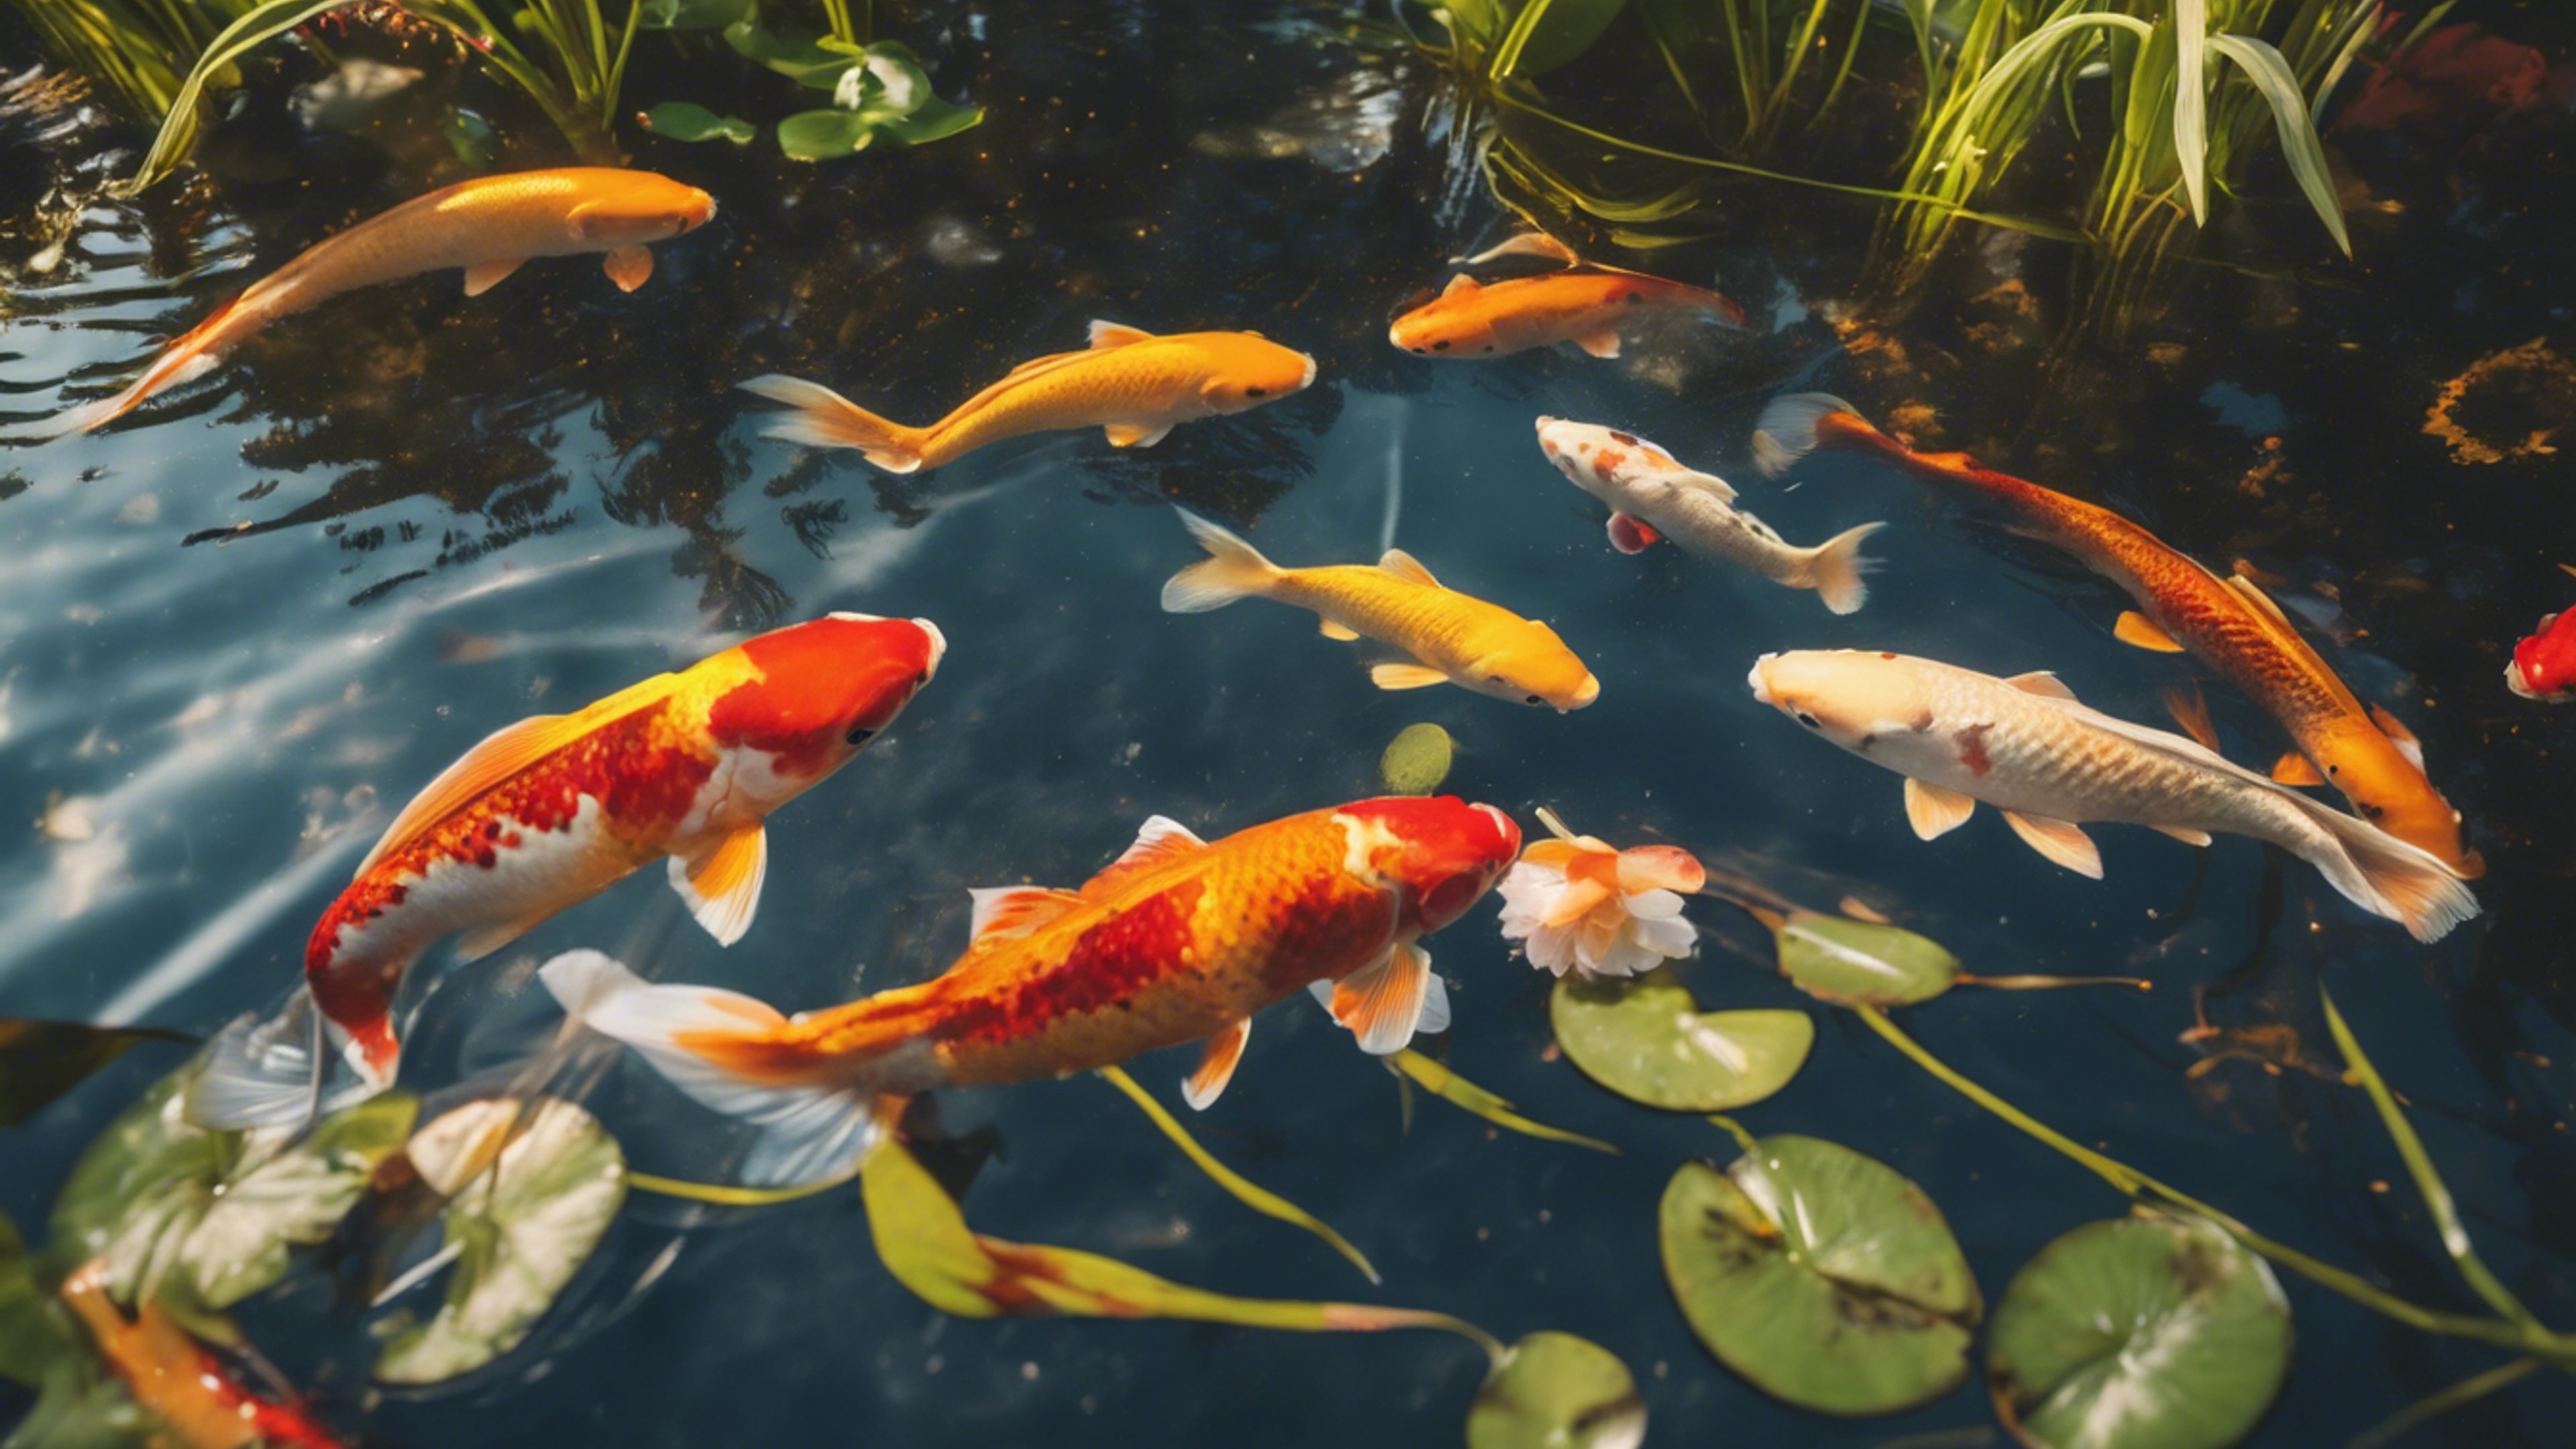 A koi pond with fish swirling under the lilies, their cool red and vibrant yellow scales shimmering under the sun. Wallpaper[e1c53d91cfb64fffb364]